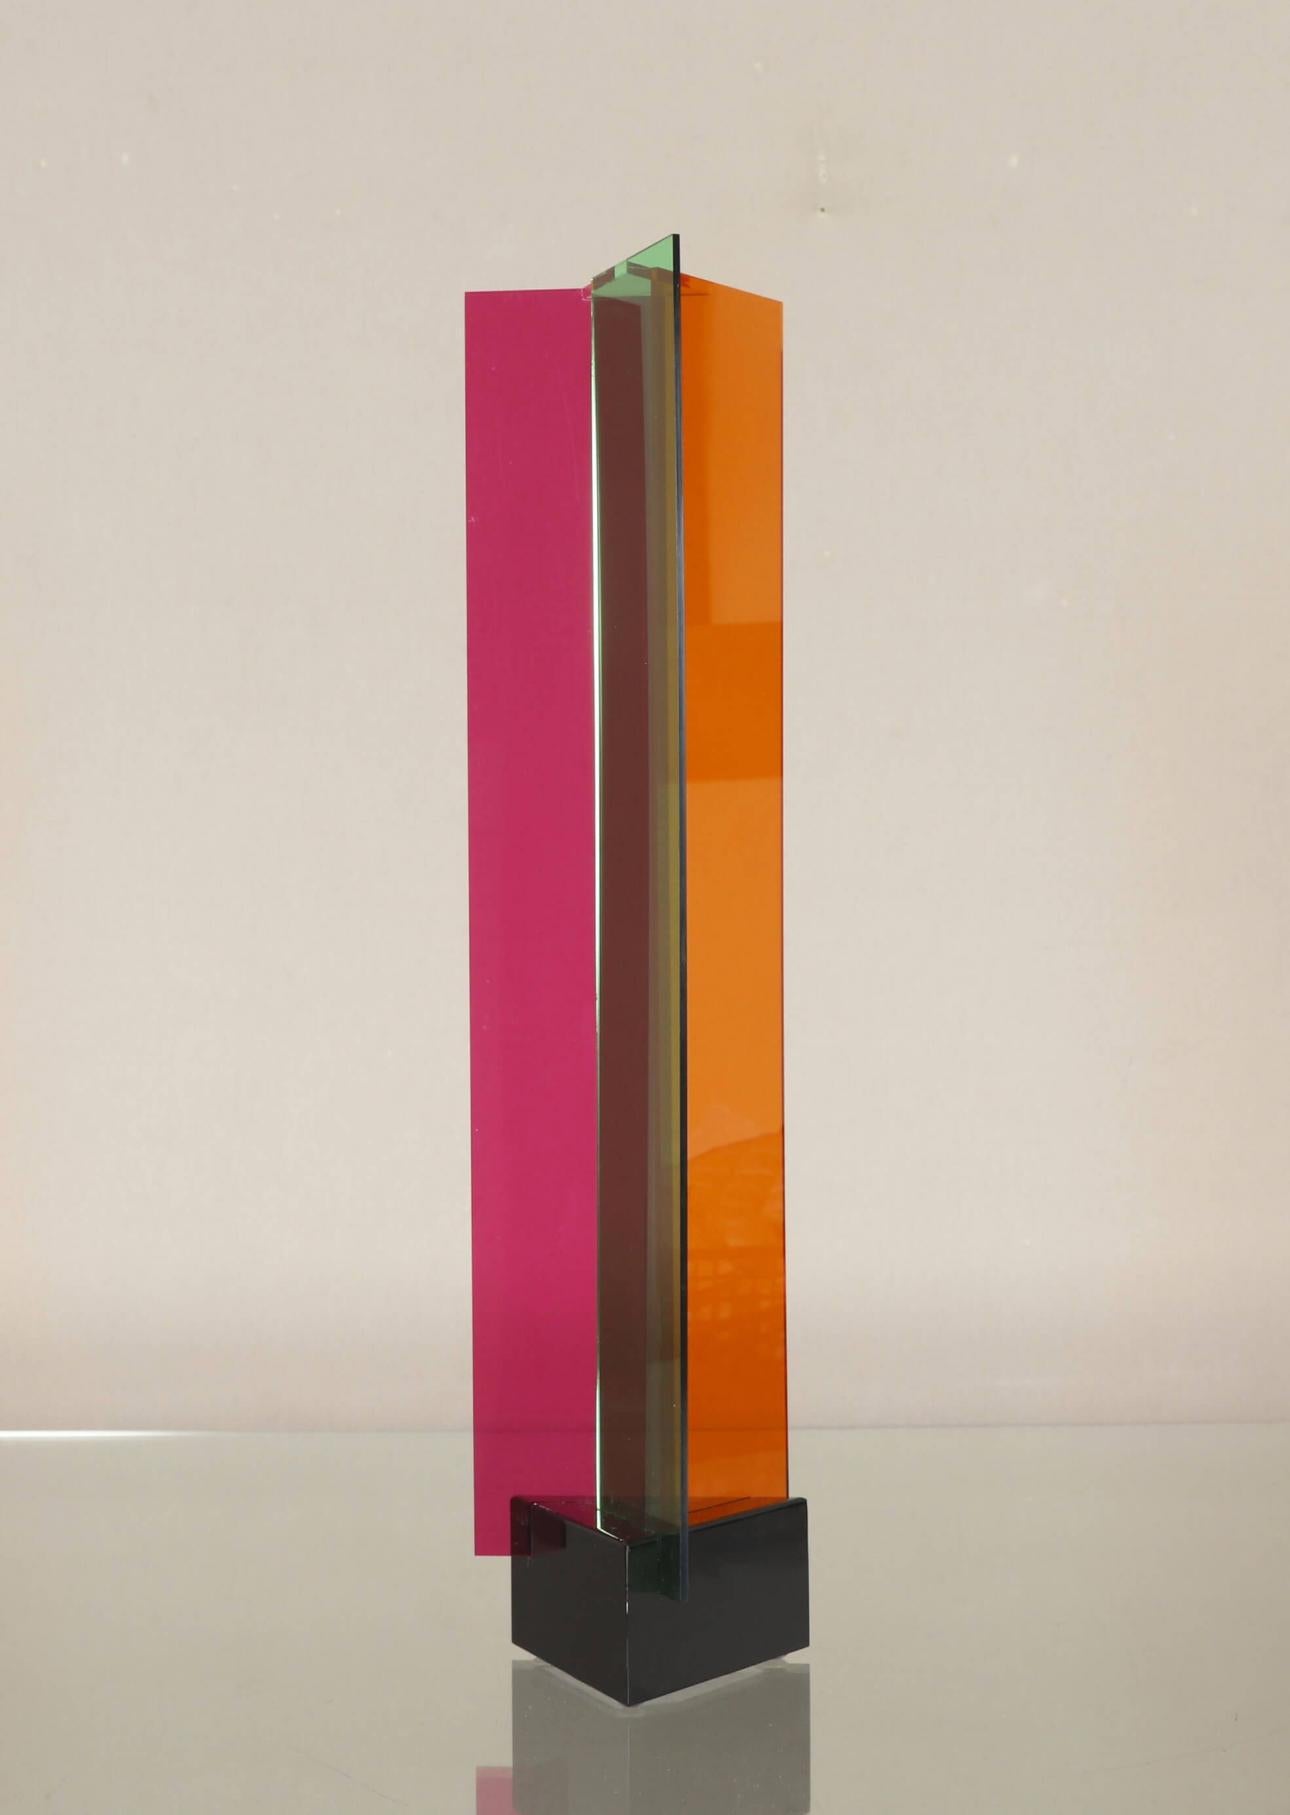 Carlos Cruz Diez
Three element transchrome 2011
Plexiglass Sculpture
Editions La Difference Paris 49 of 75
21 x 5 x 5 in
Signed, dated, and numbered at the publisher label at the bottom.